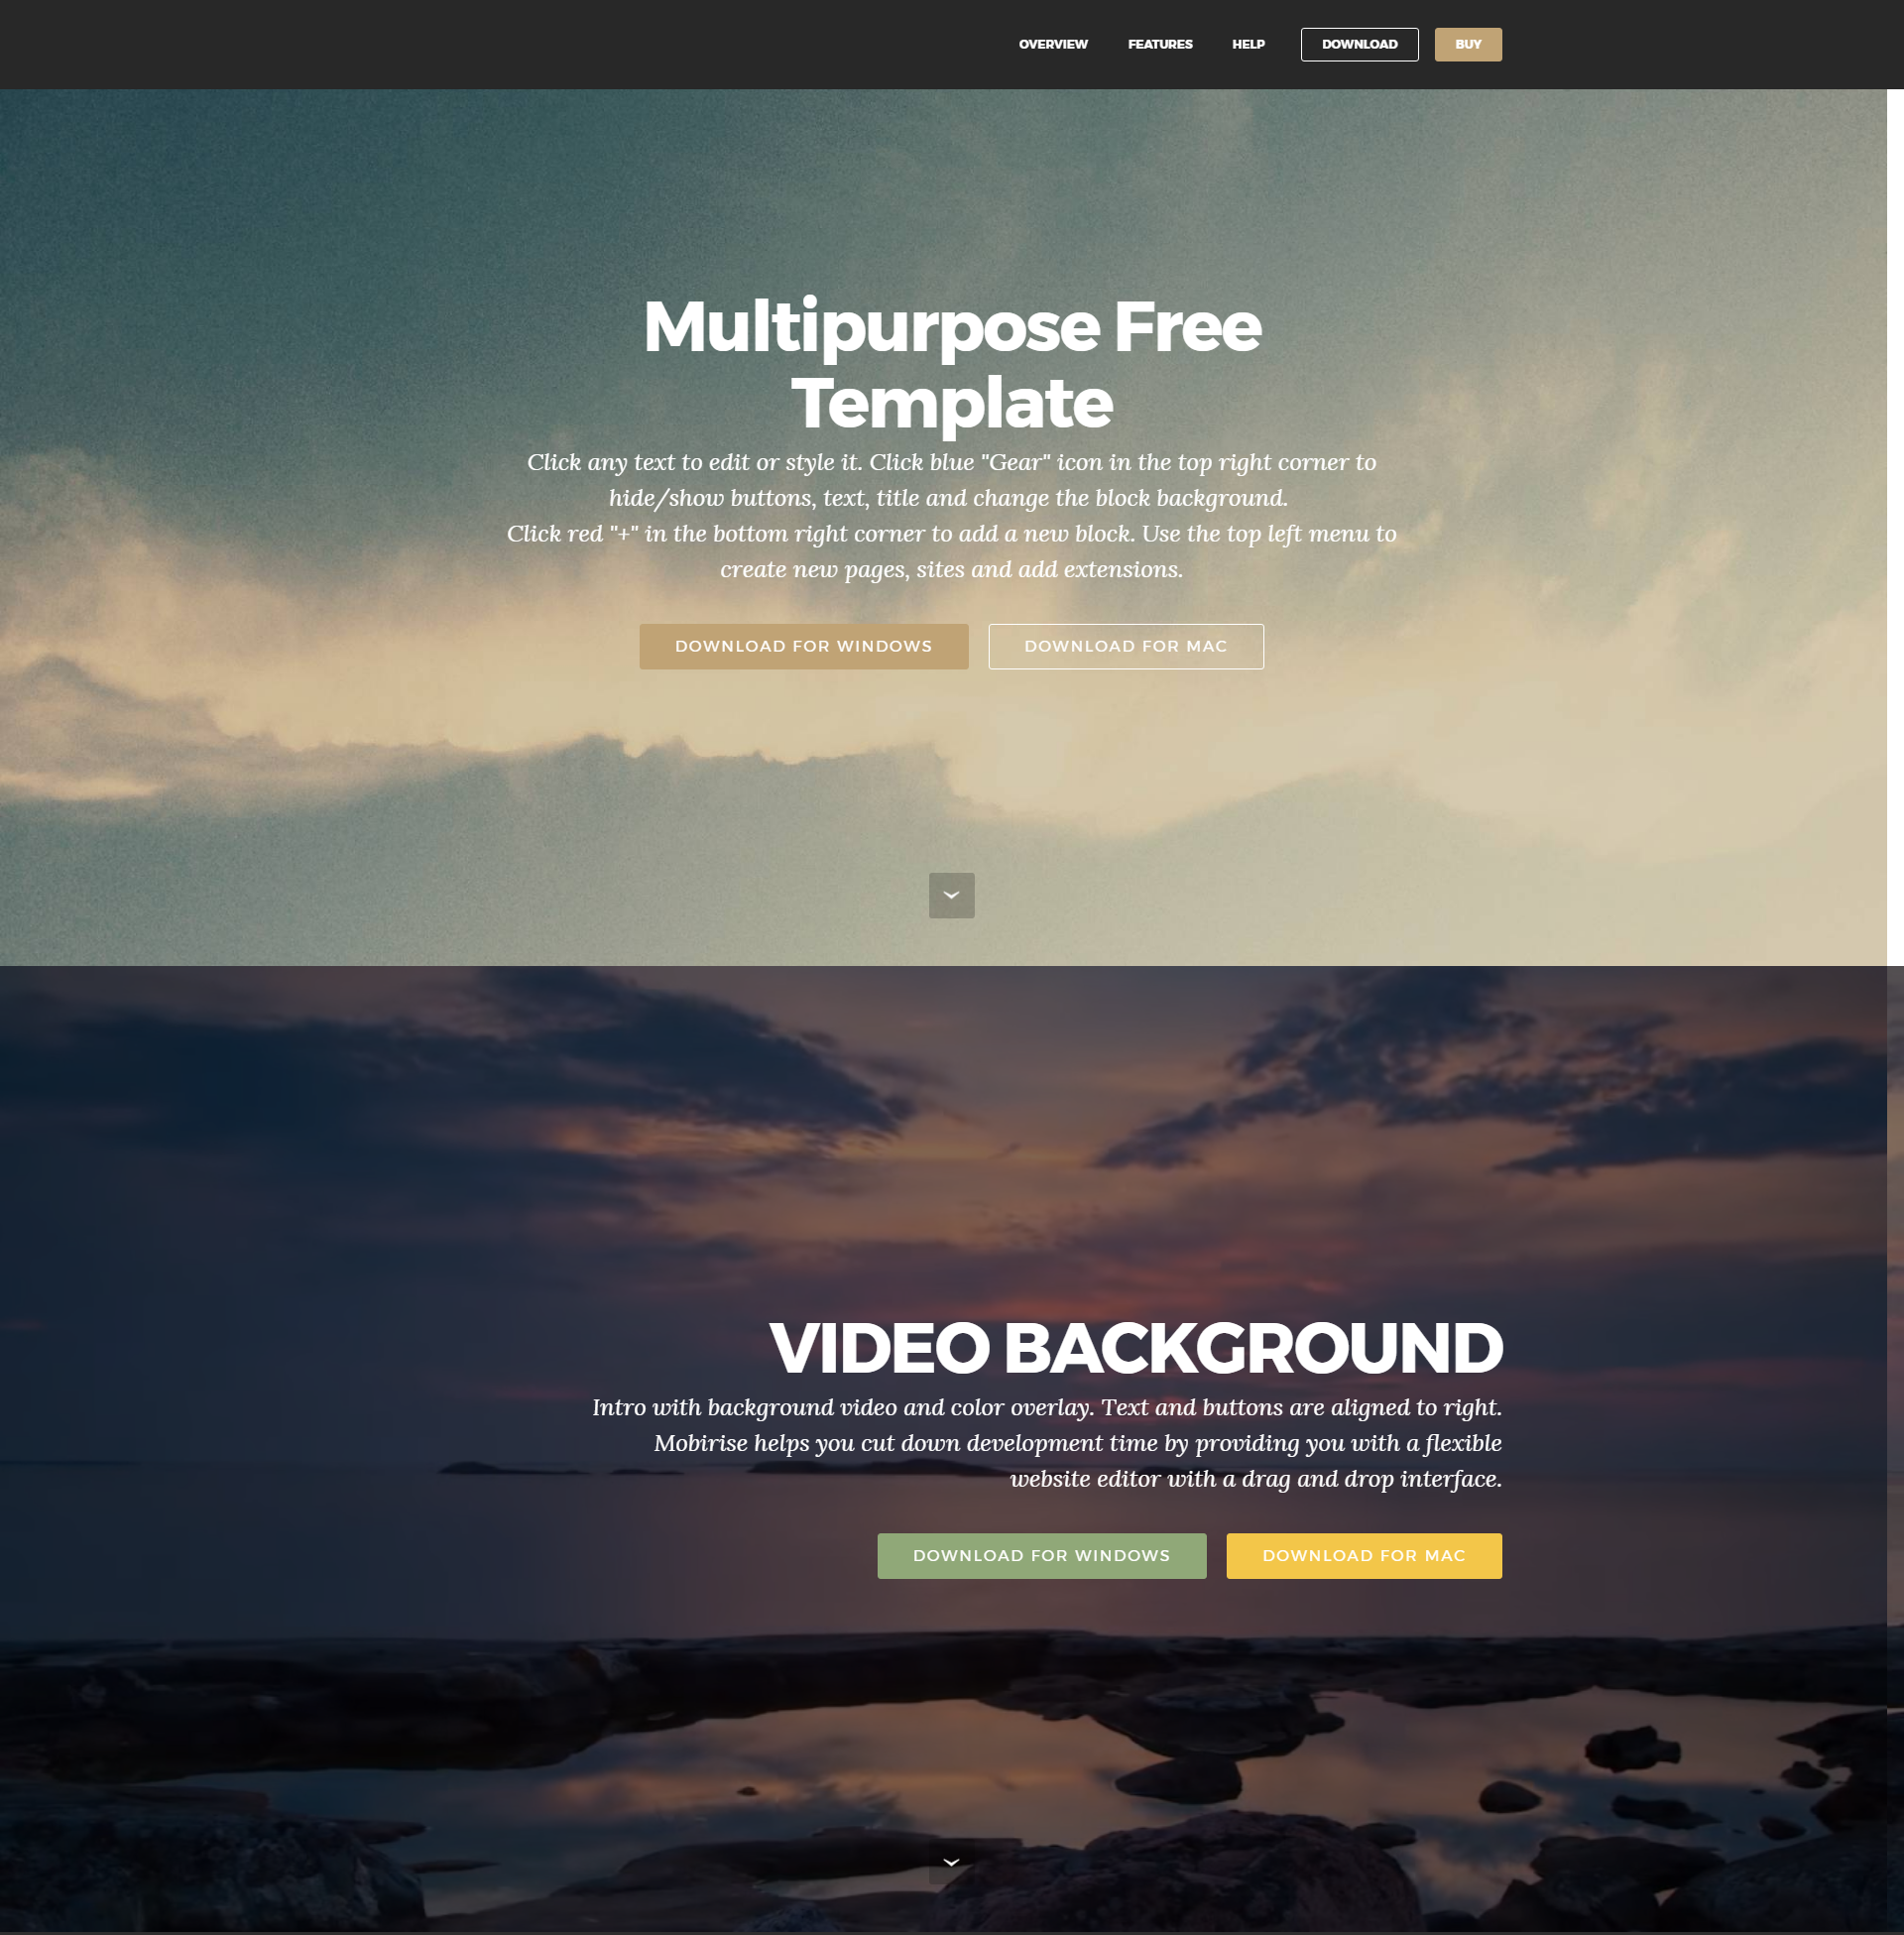 HTML5 Bootstrap Themes